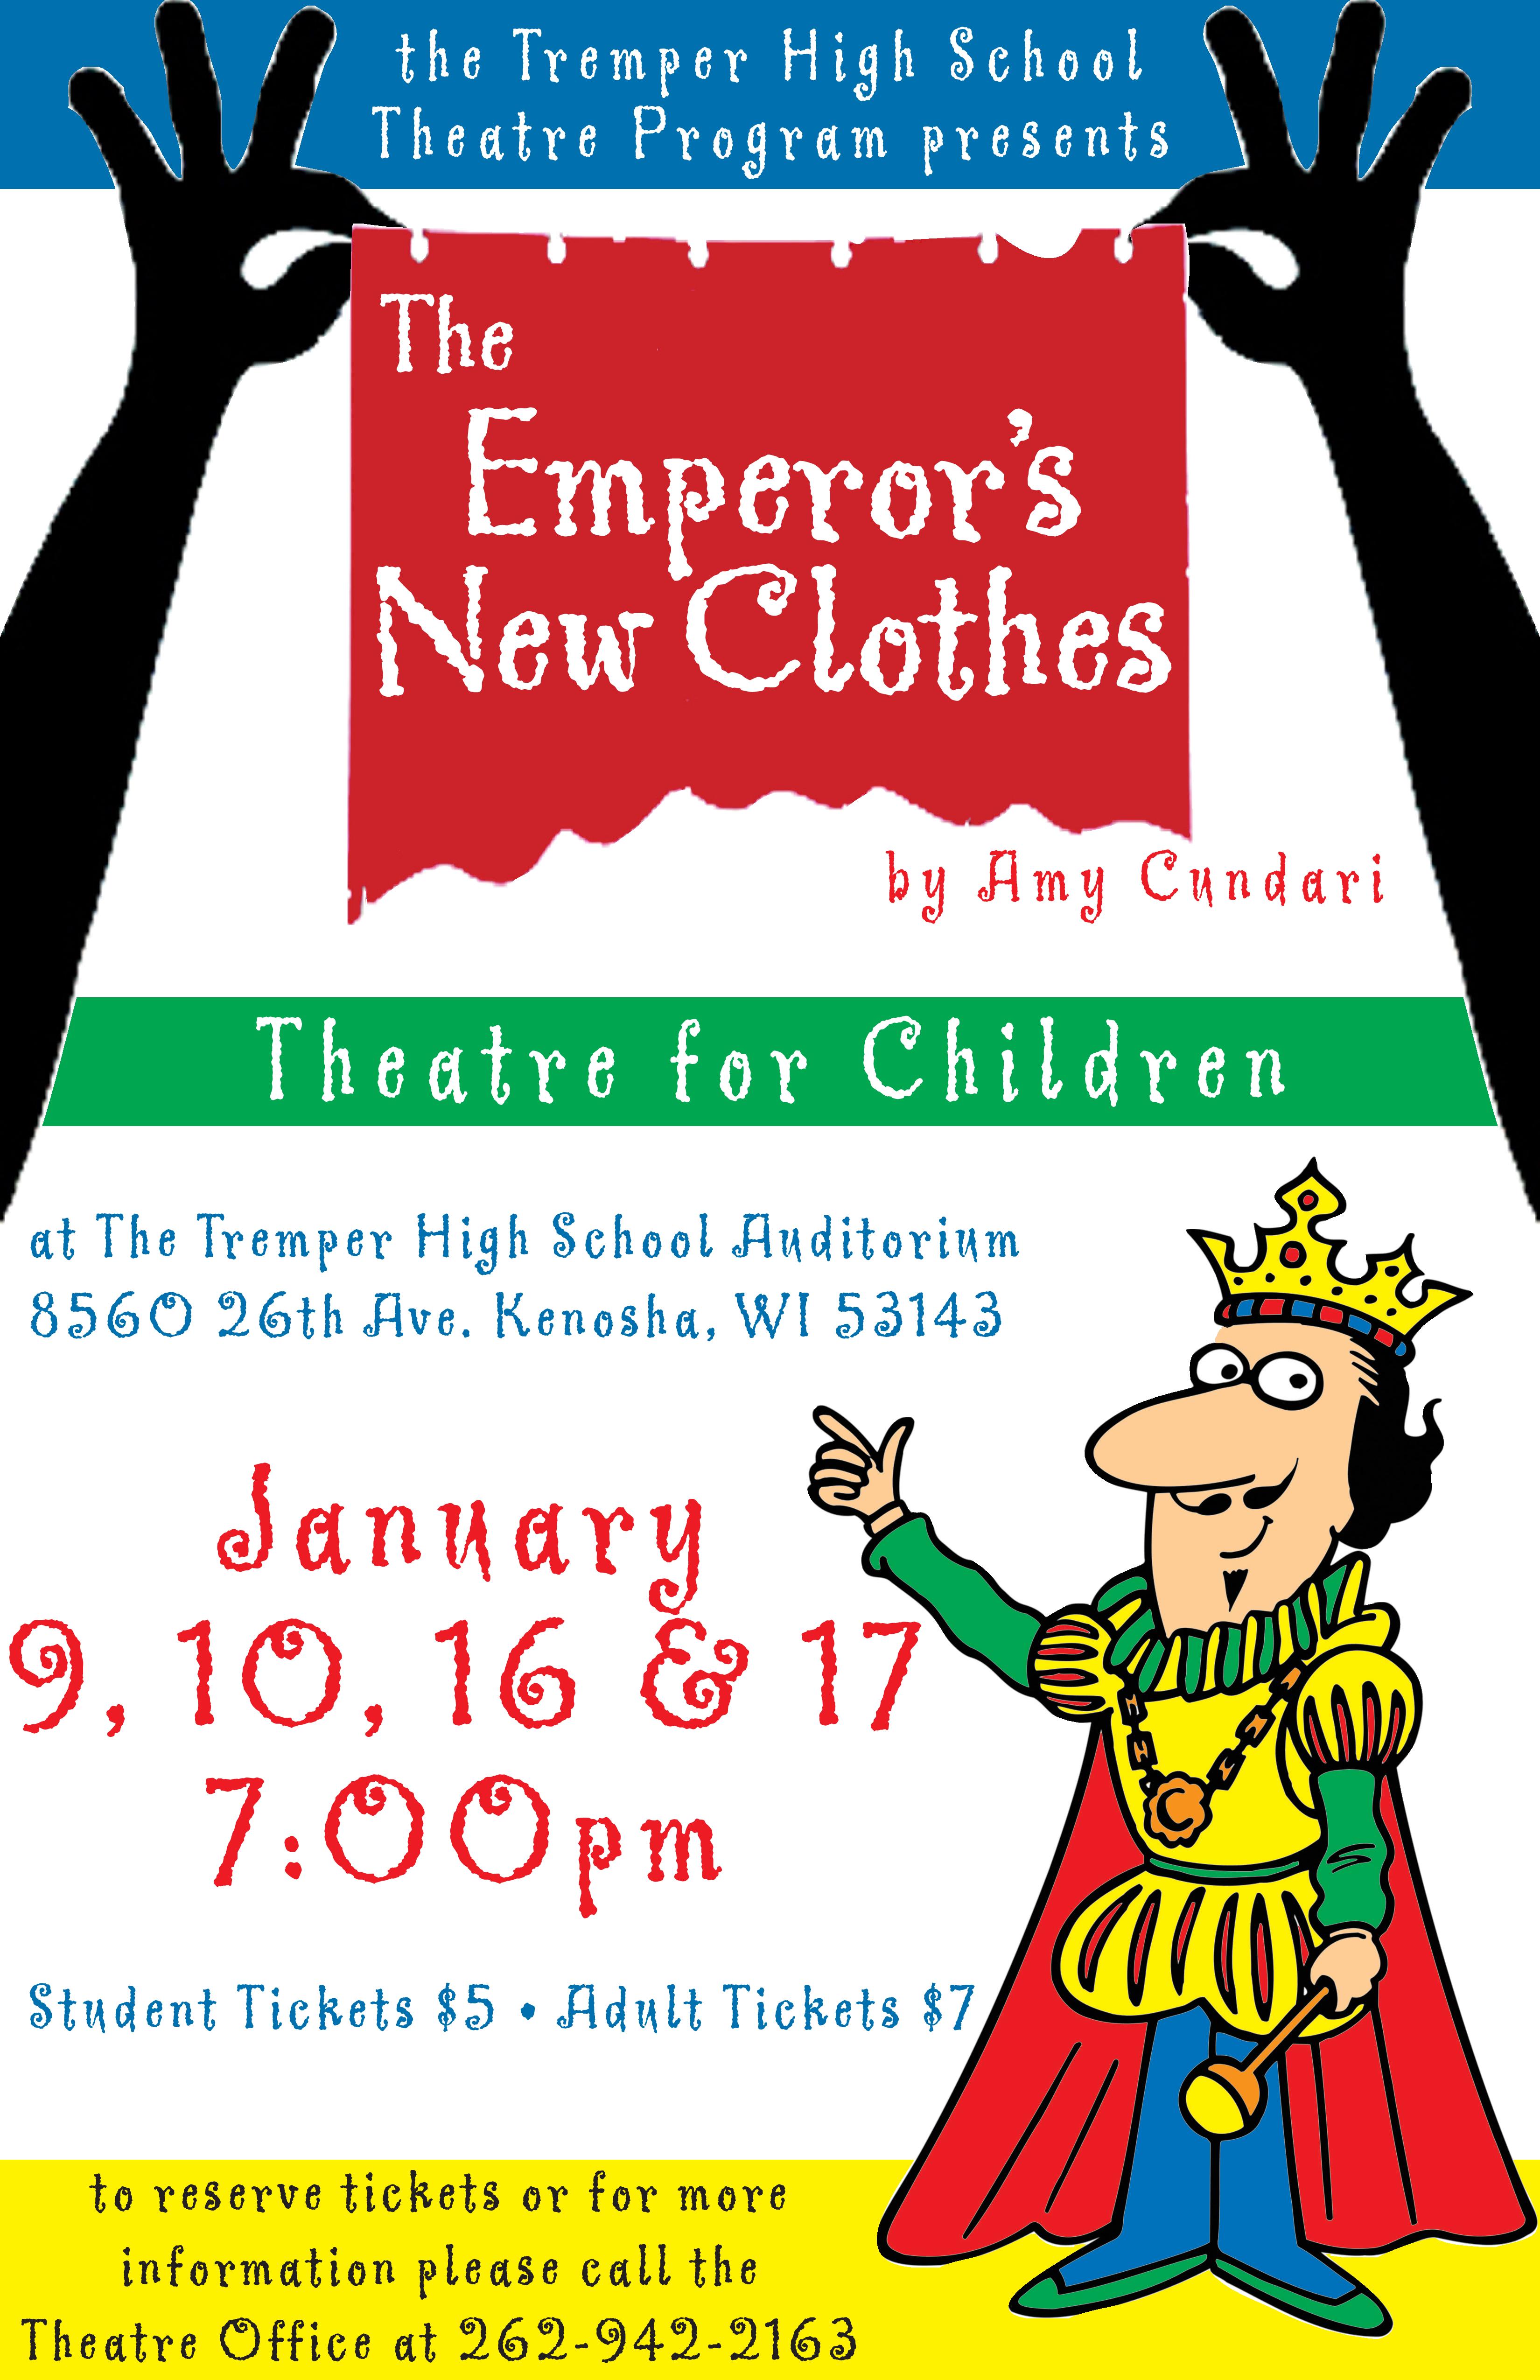 The poster for The Emperor's New Clothes